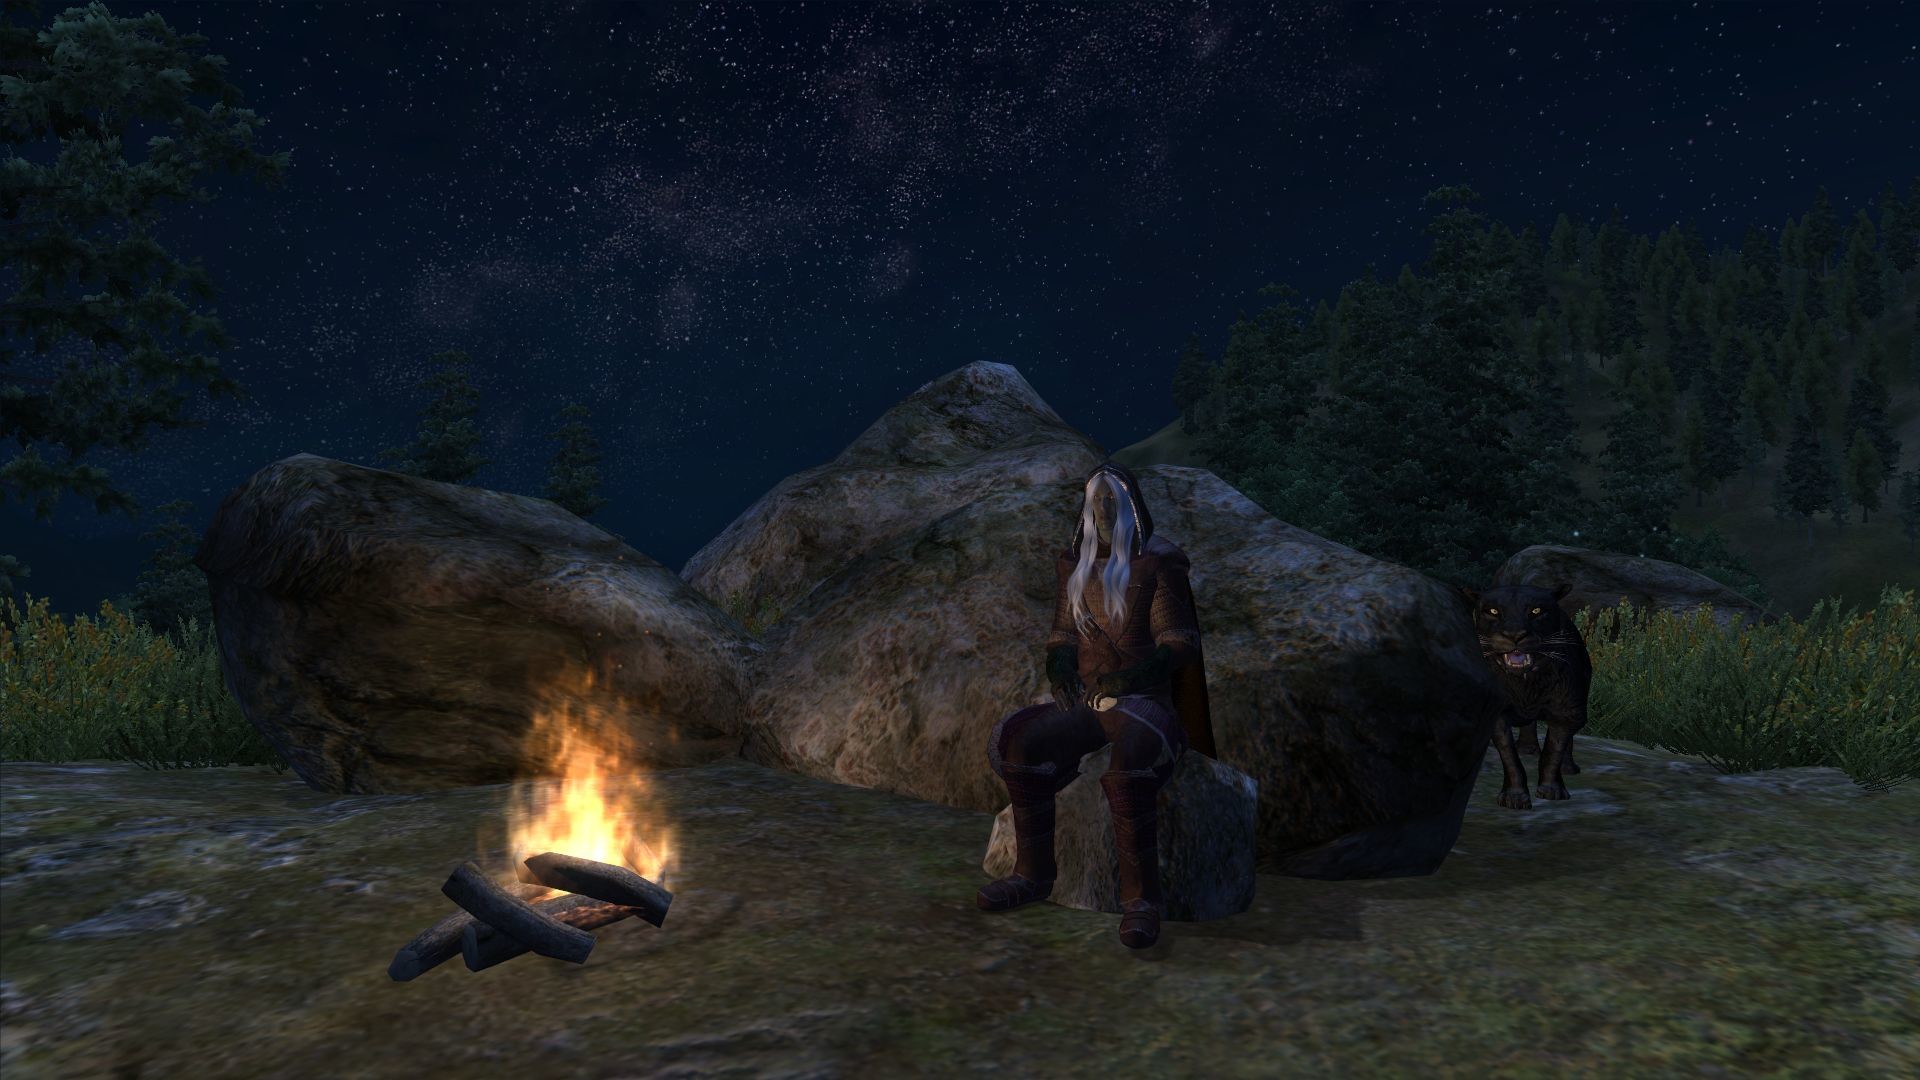 1920x1080 A night out in the wilderness with Drizzt and Guenhywar